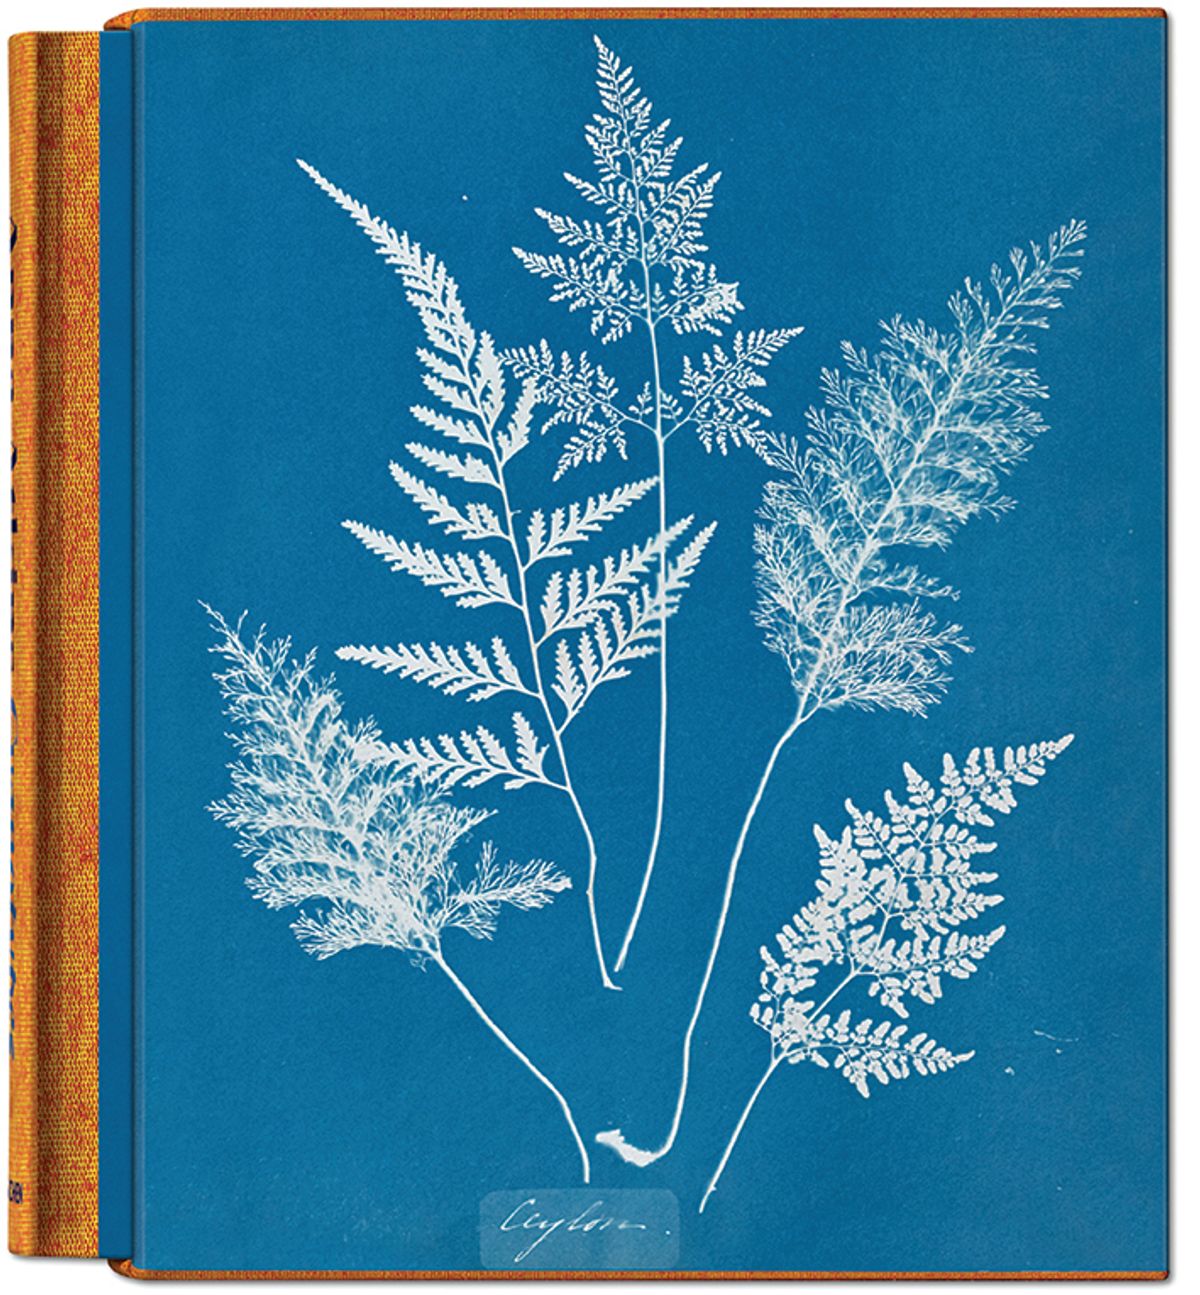 A cyanotype image of Delesseria sinuosa algae in the book British Algae, Part V (1845) by Anna Atkins

© TASCHEN/New York Public Library